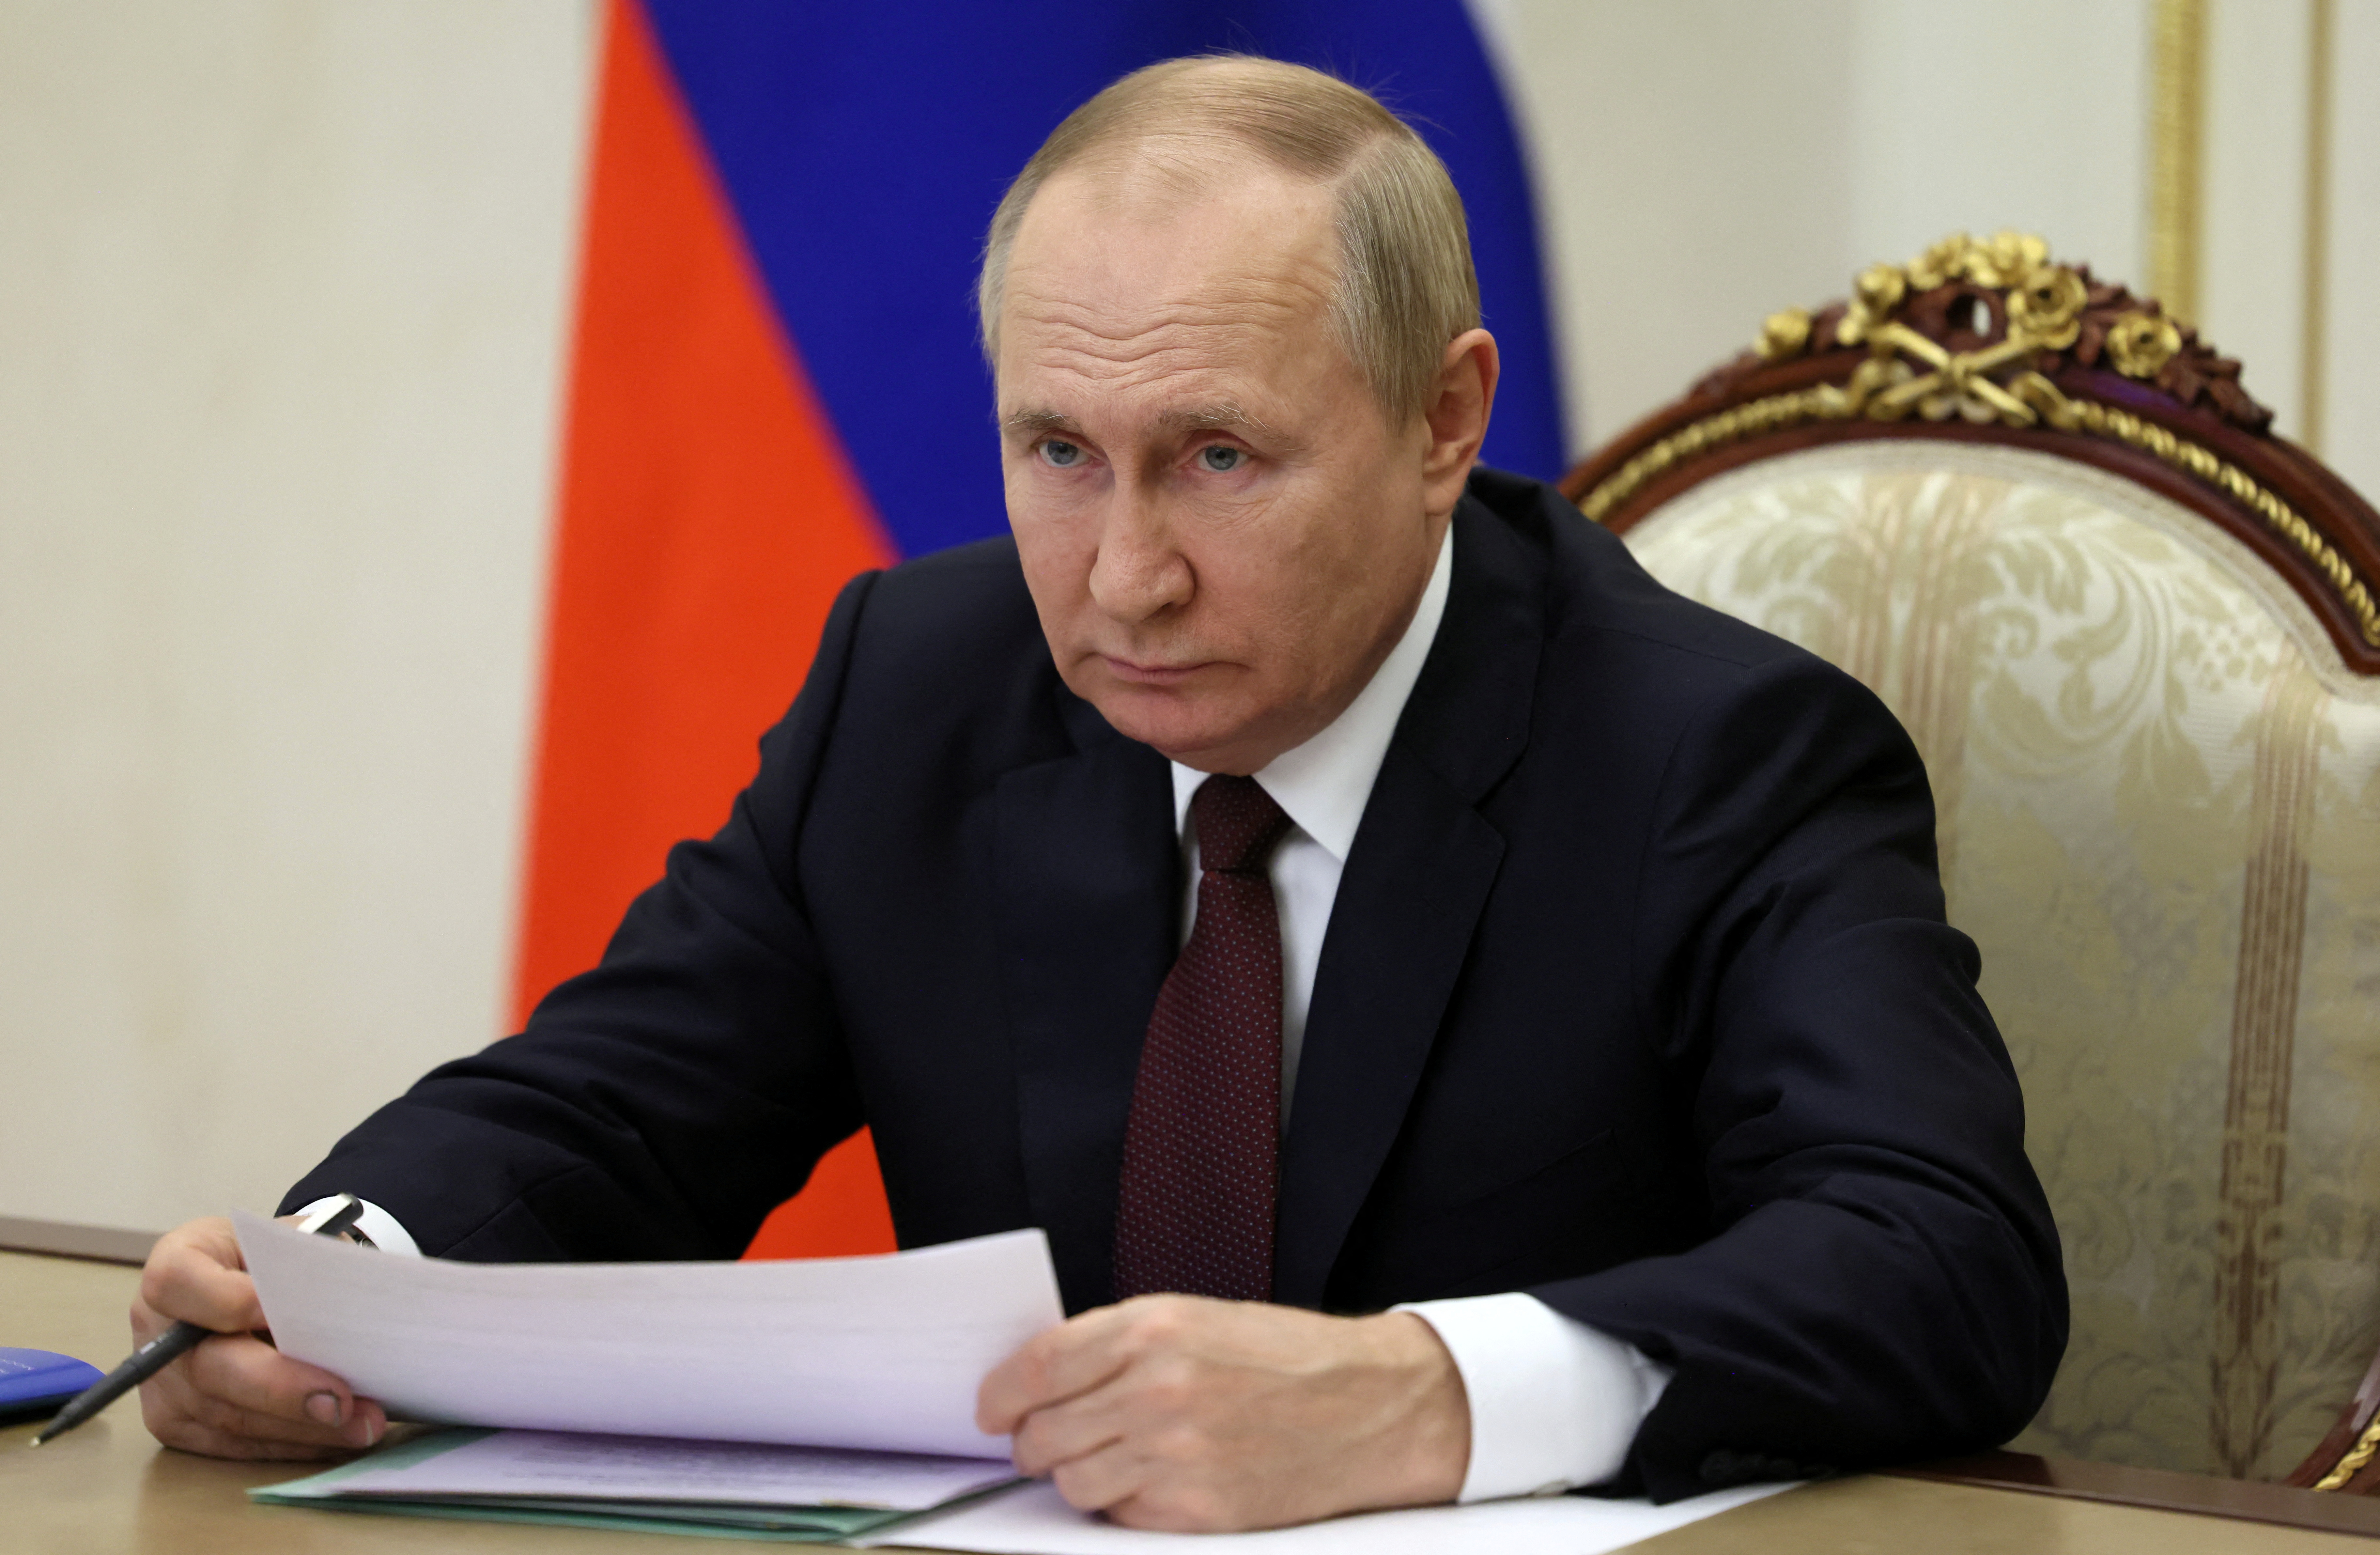 Russian President Vladimir Putin chairs a meeting with members of the government via video conference in Moscow, Russia, on November 3, 2022. Sputnik/Mikhail Metzel/Pool via REUTERS